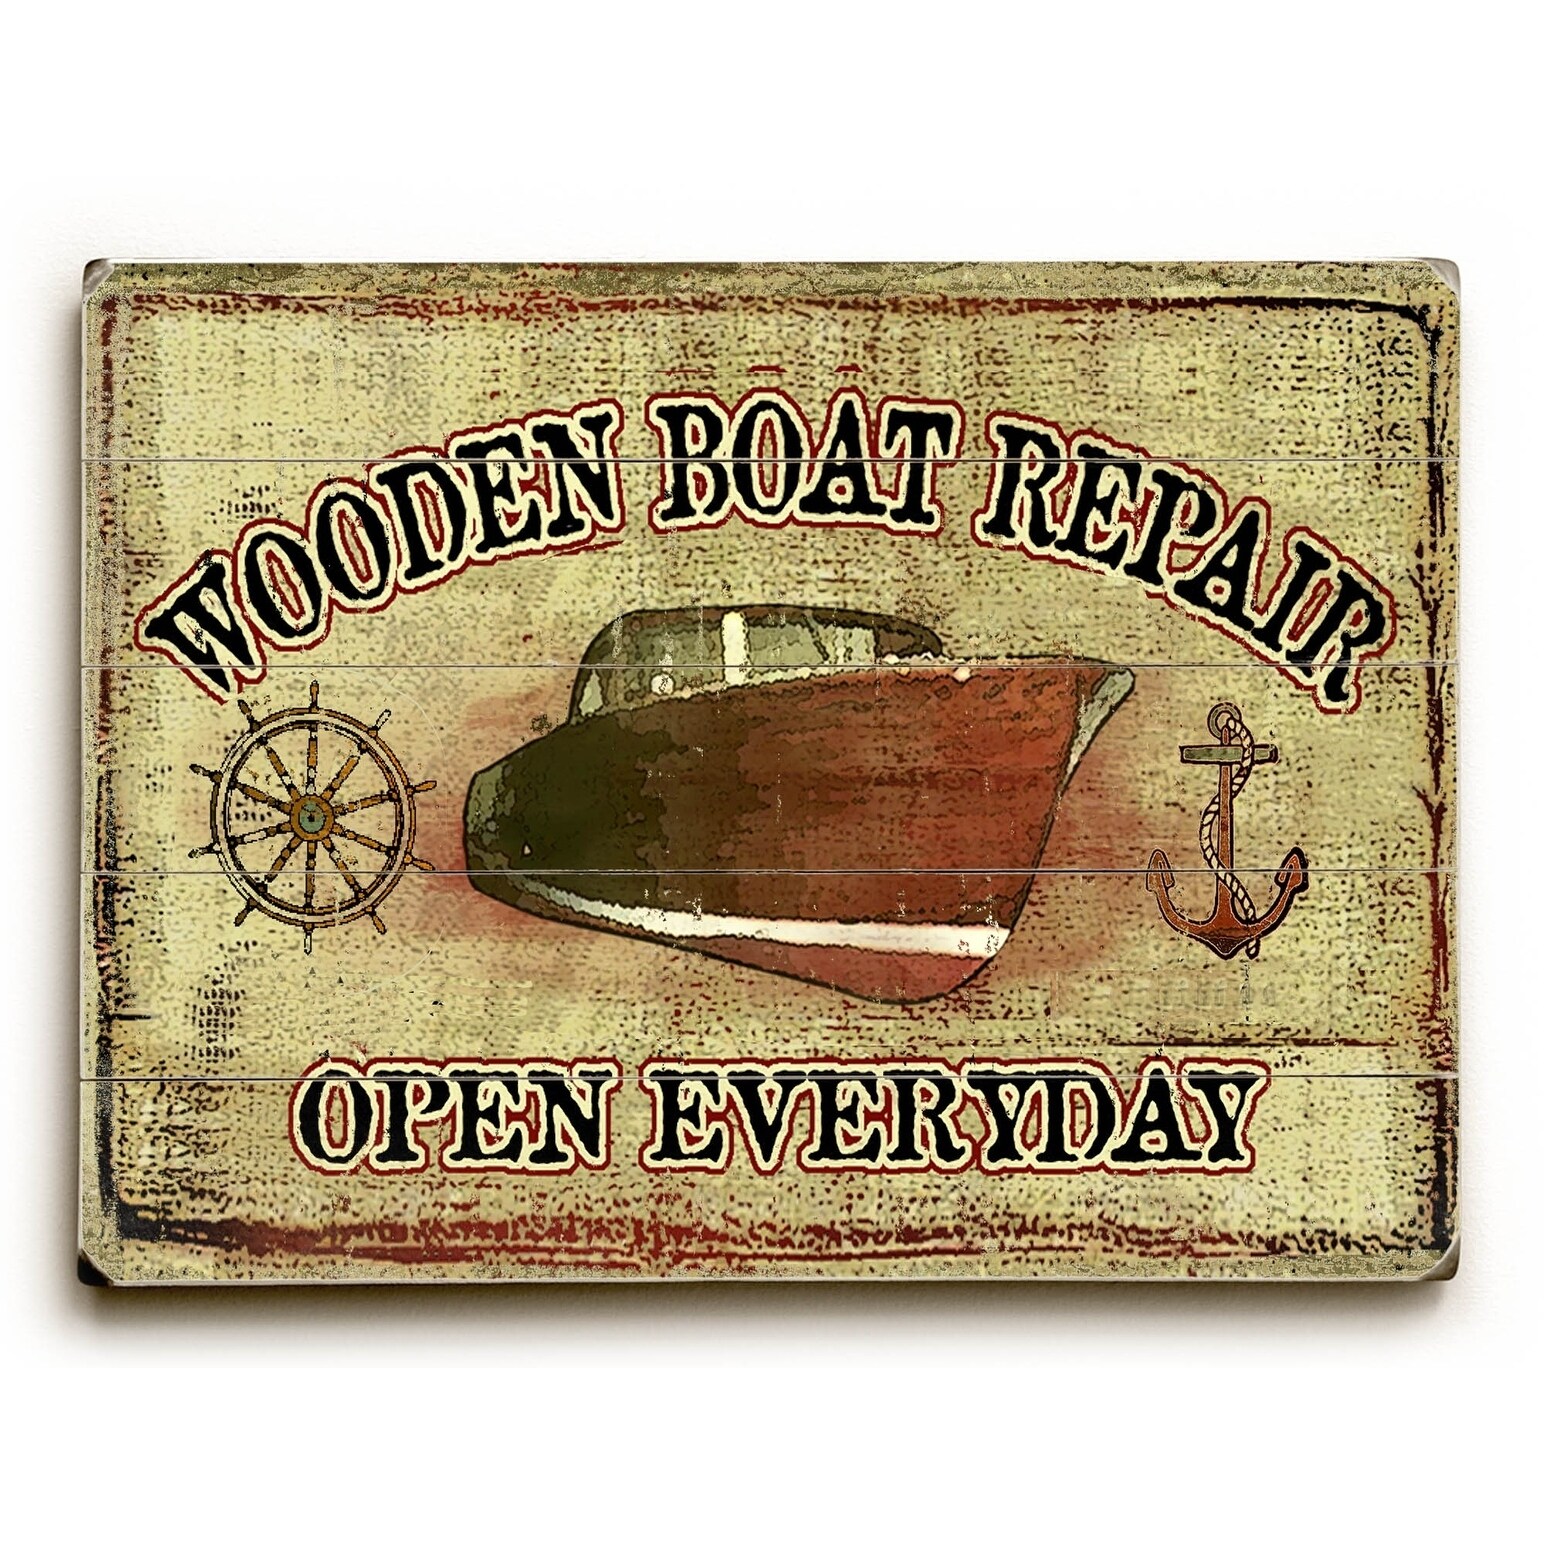 Shop Wooden Boat Repair Planked Wood Wall Decor By Lynne Ruttkay On Sale Overstock 22612689